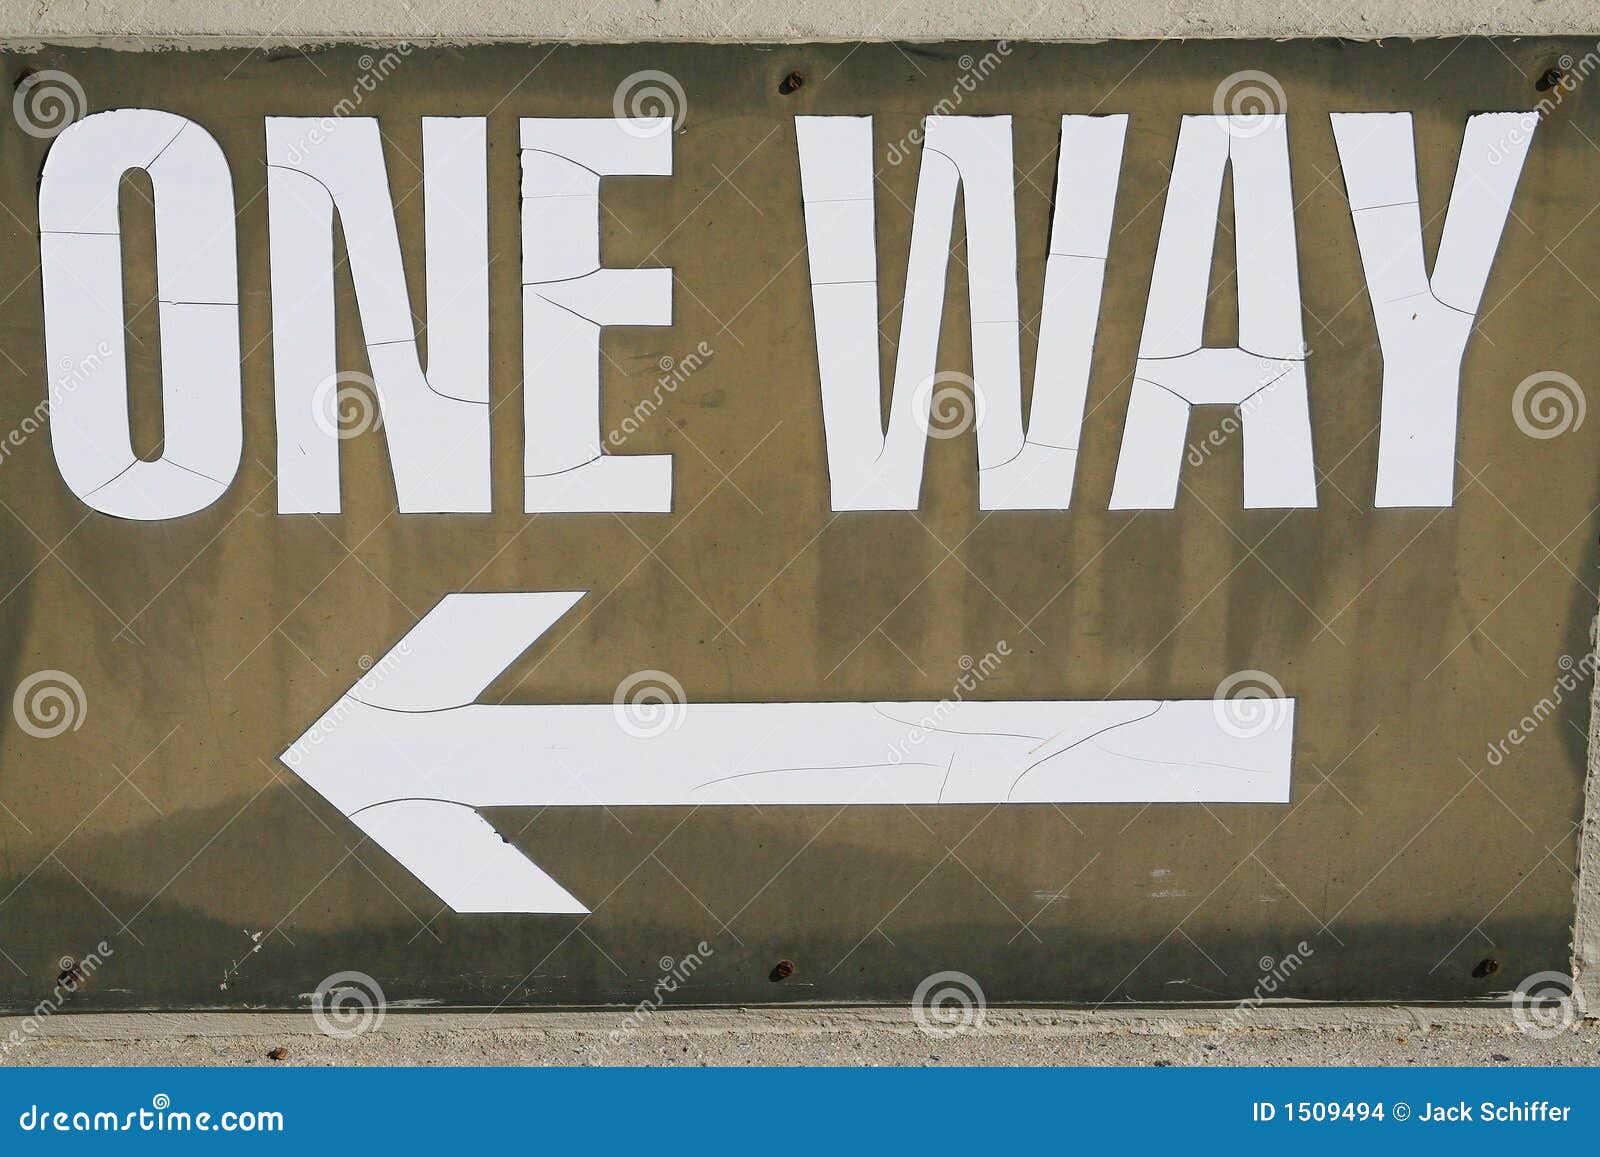 44,994 One Way Street Images, Stock Photos, 3D objects, & Vectors